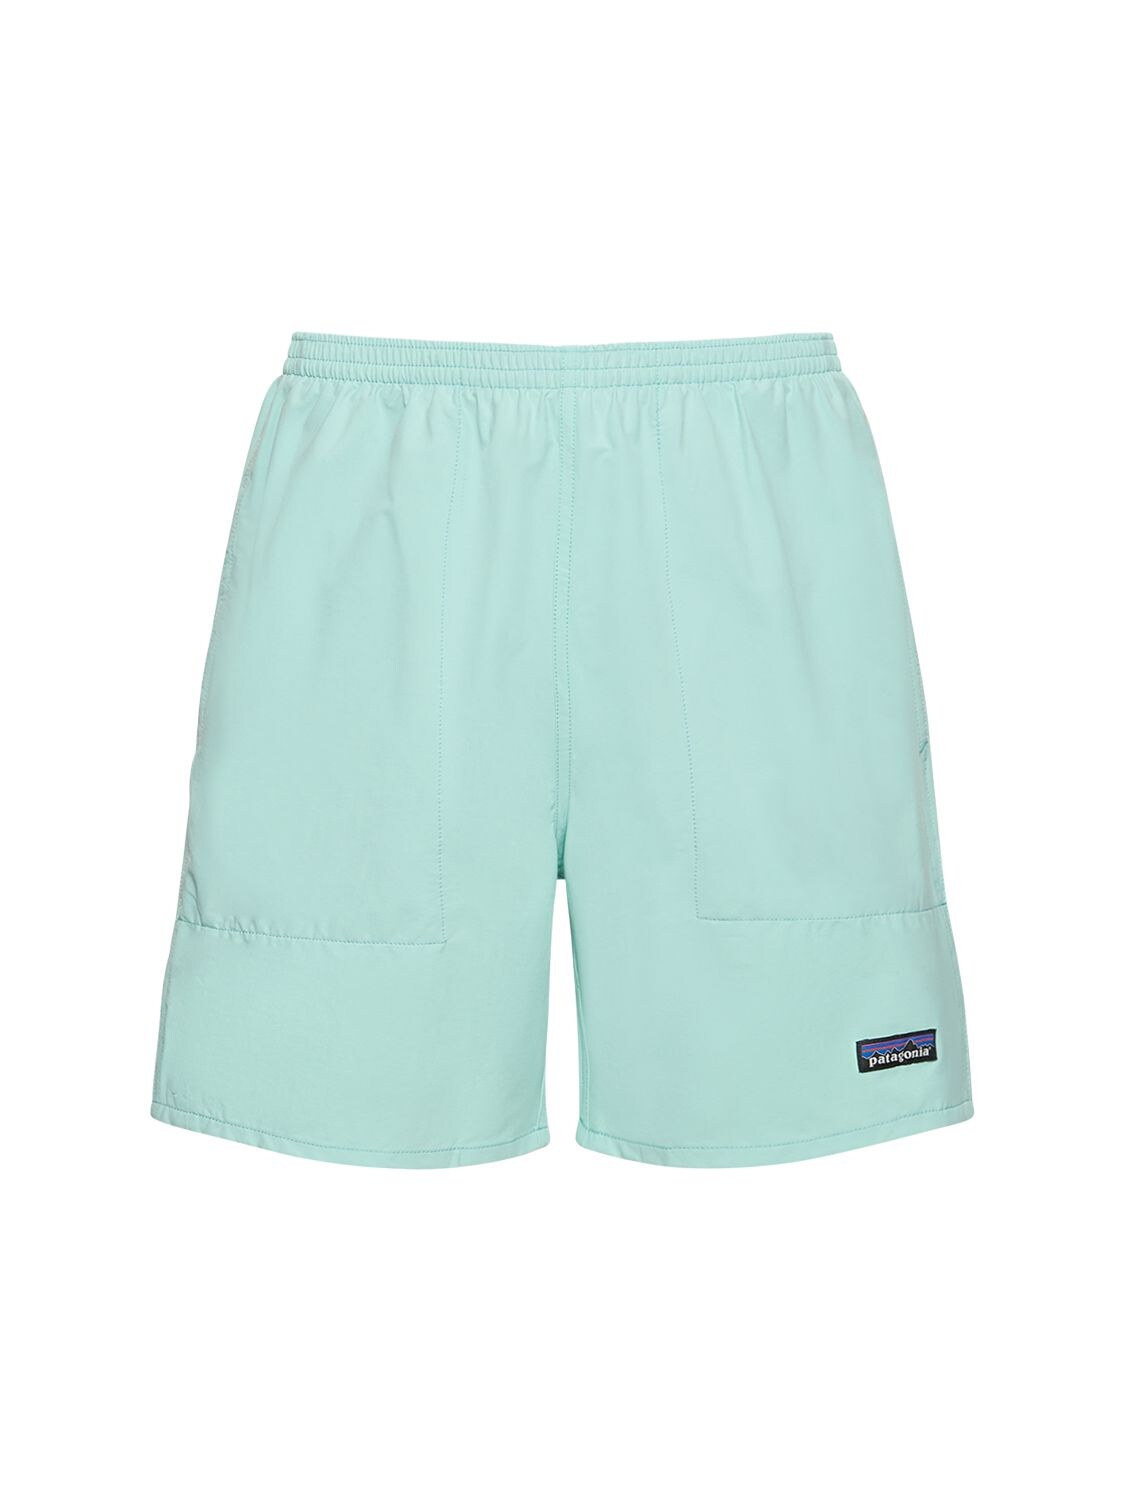 Patagonia Baggies Lights In Turquoise